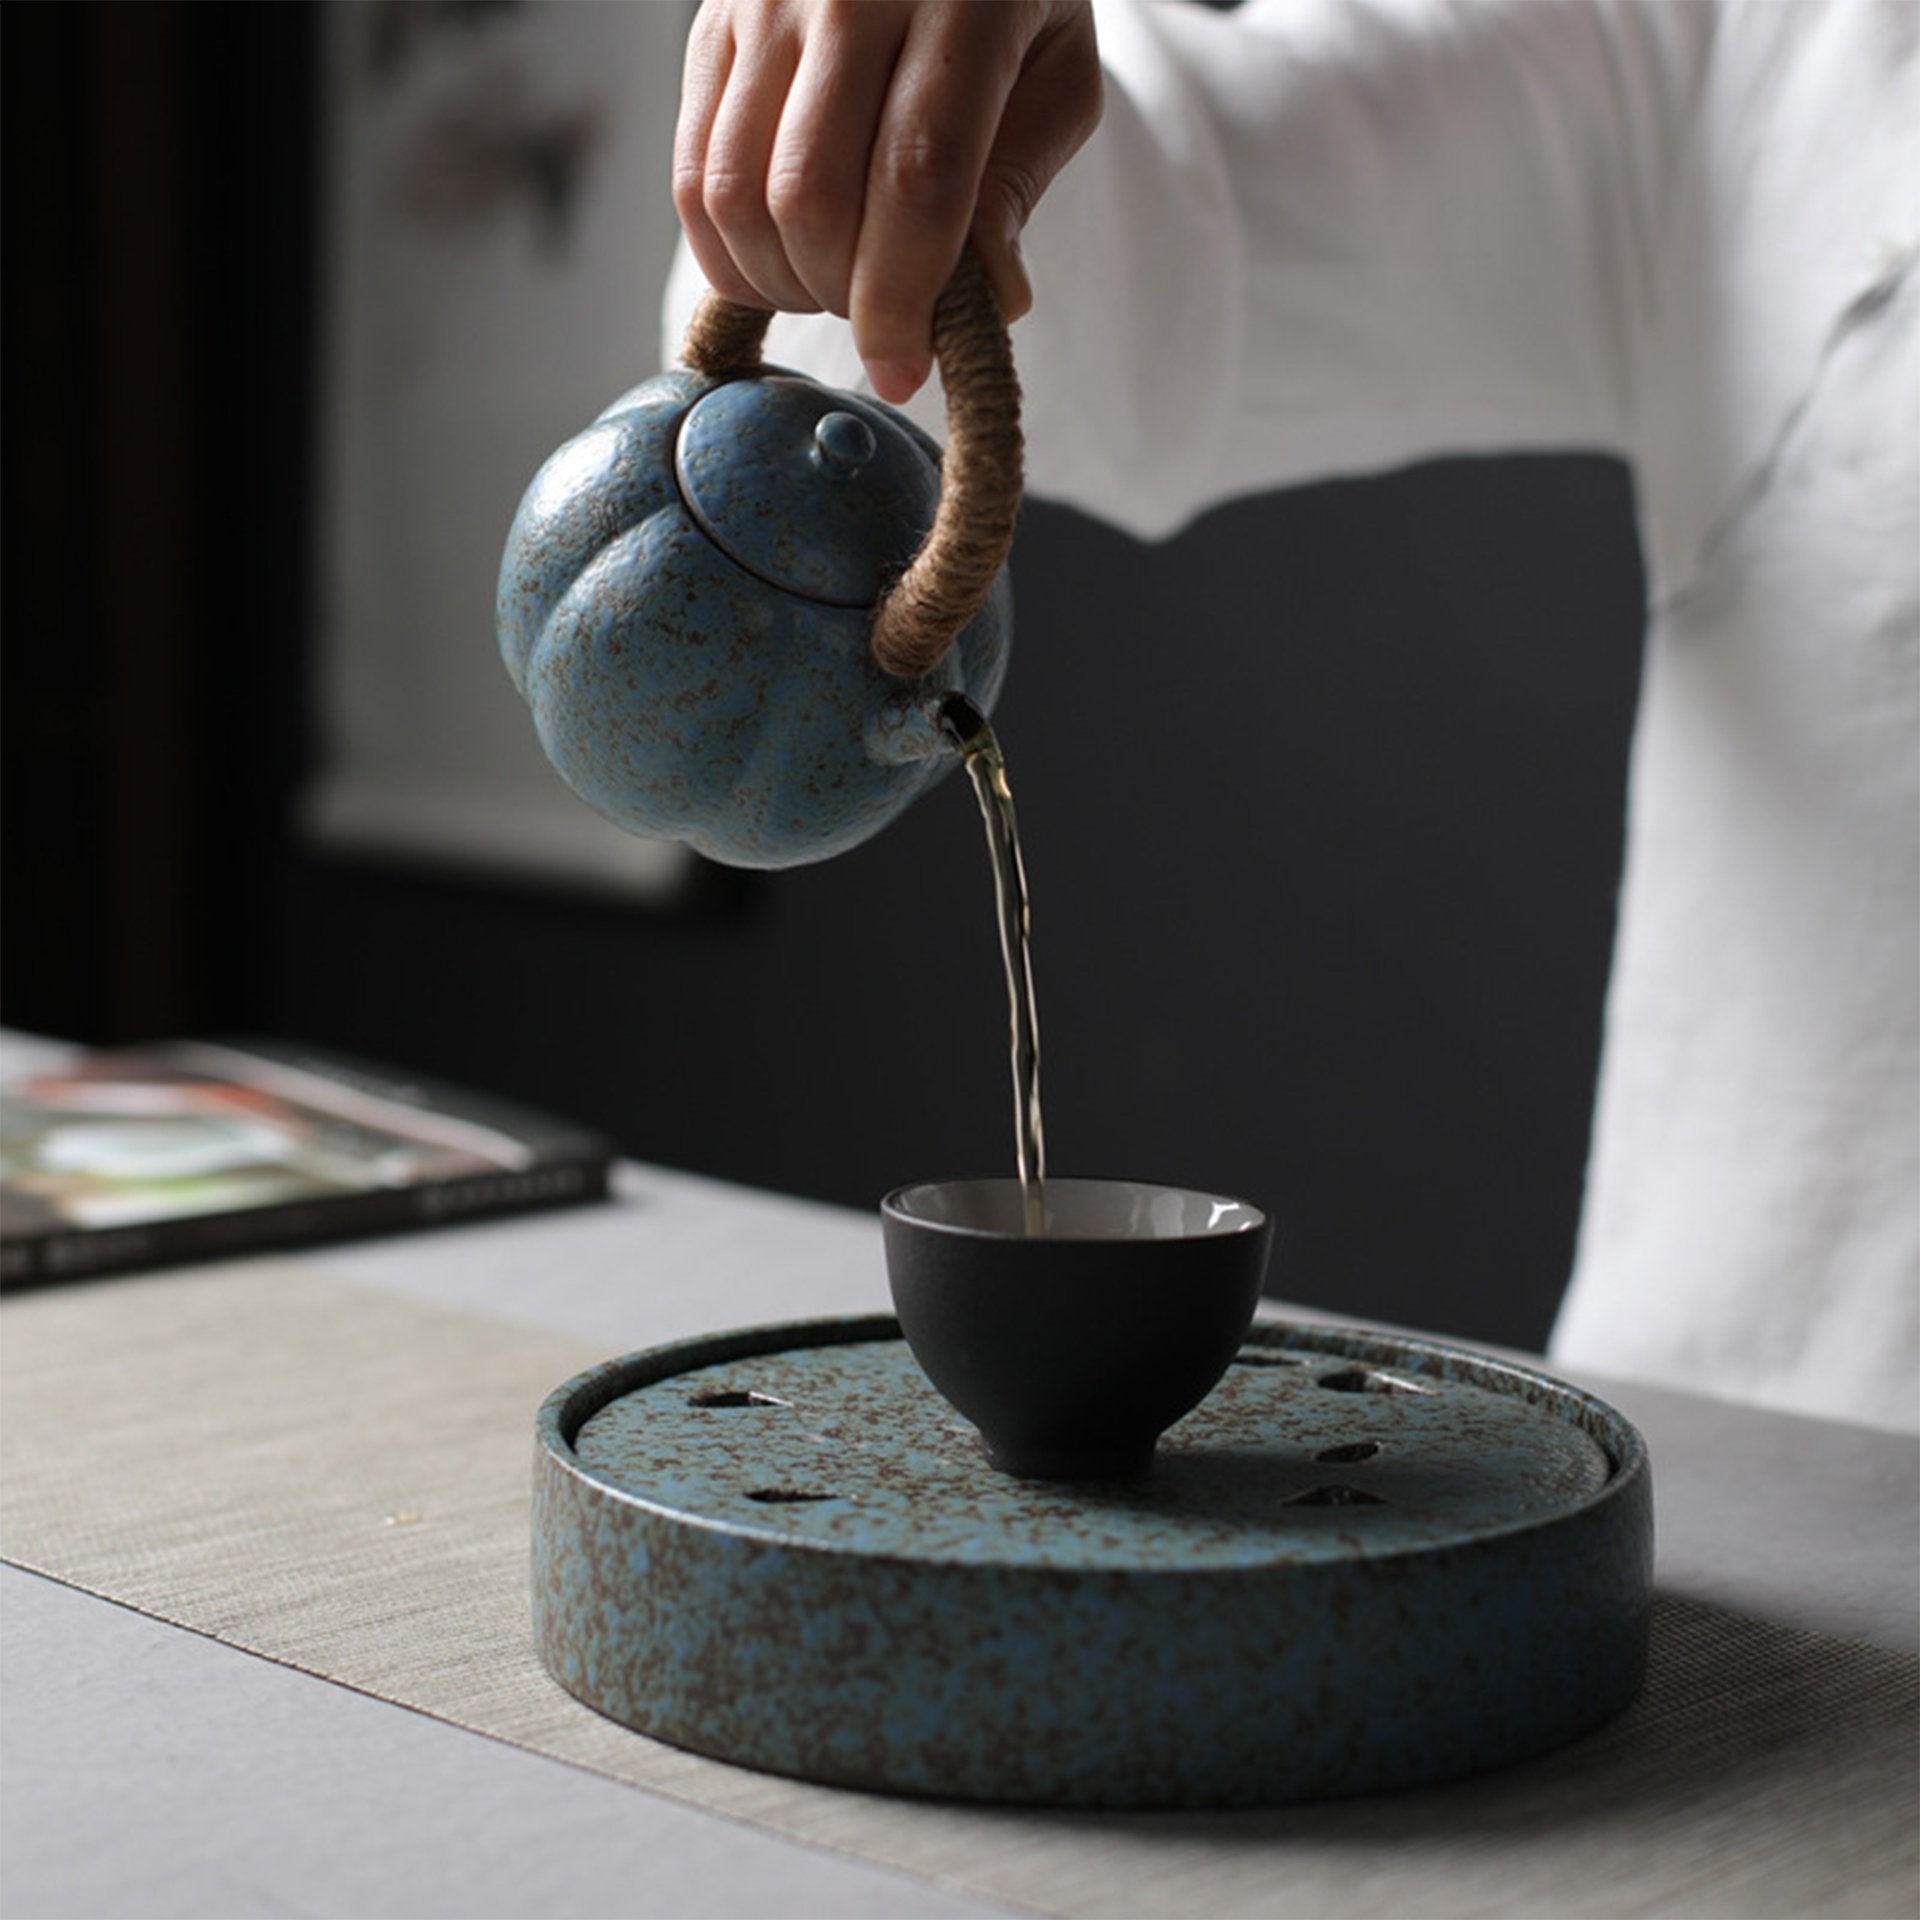 Hand pouring tea from a blue teapot into a black cup on a speckled blue tray.